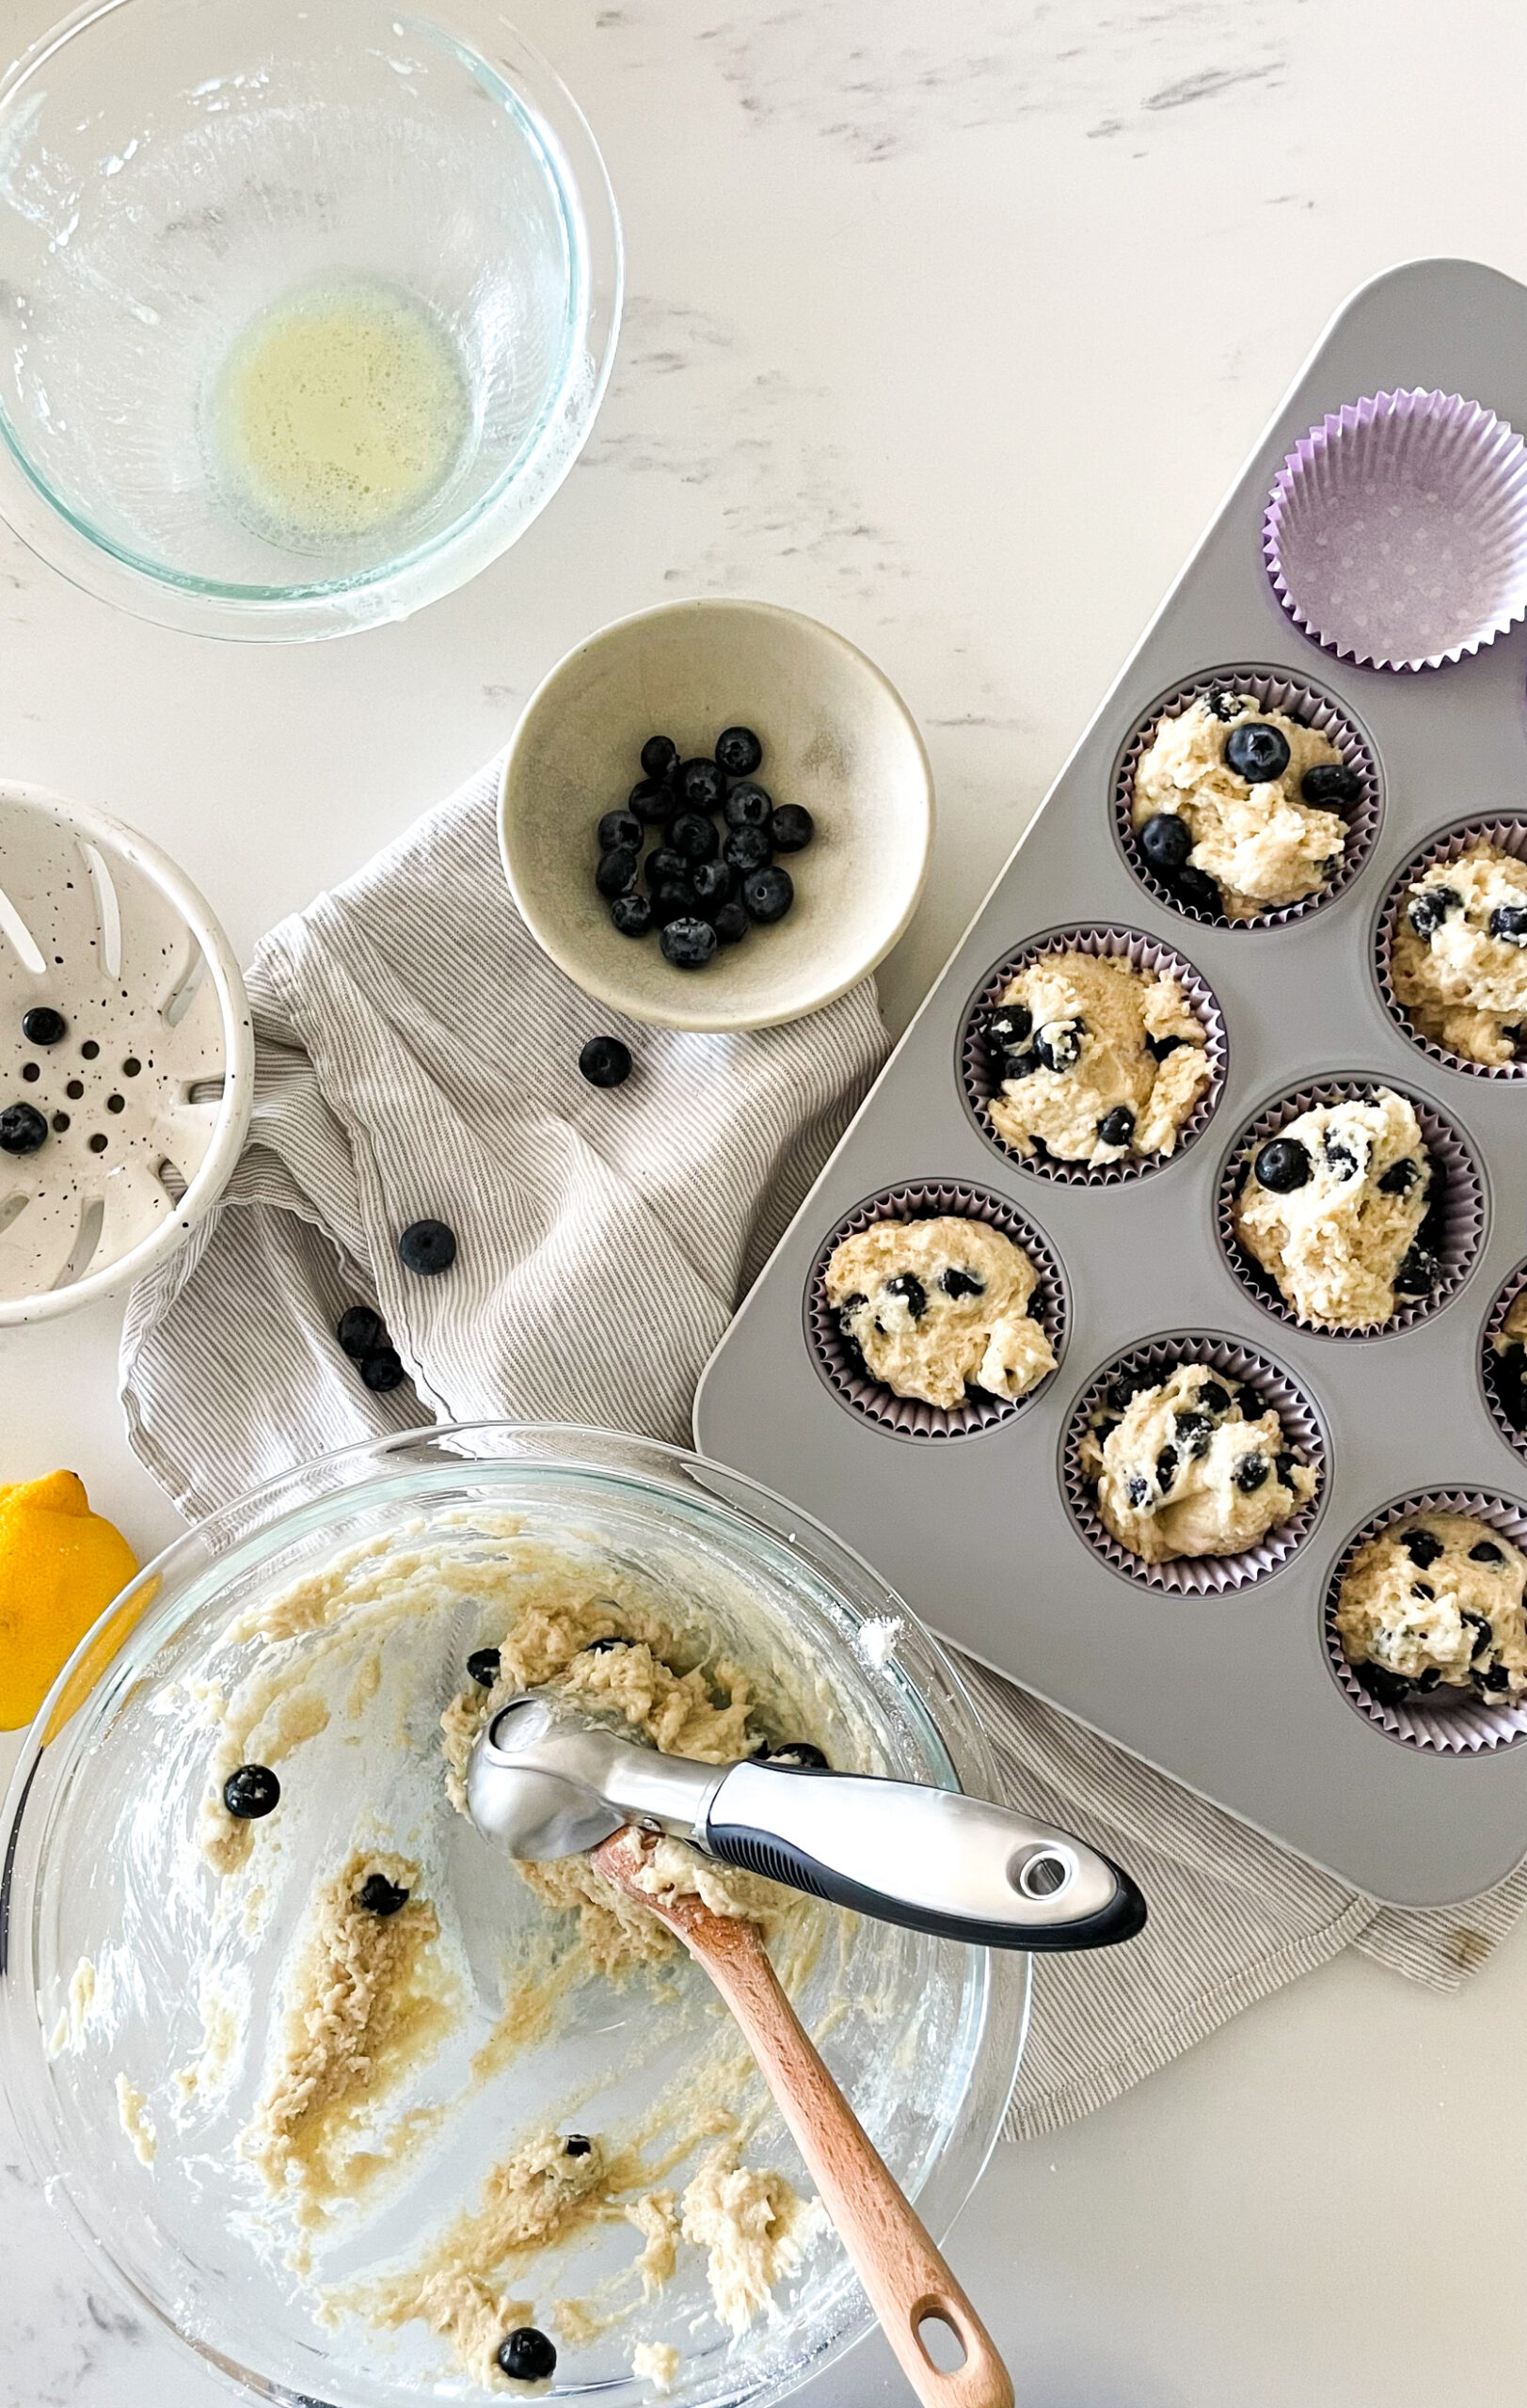 preparing gluten-free blueberry lemon muffins - uncooked batter in the muffin tin and an empty mixing bowl off to the side